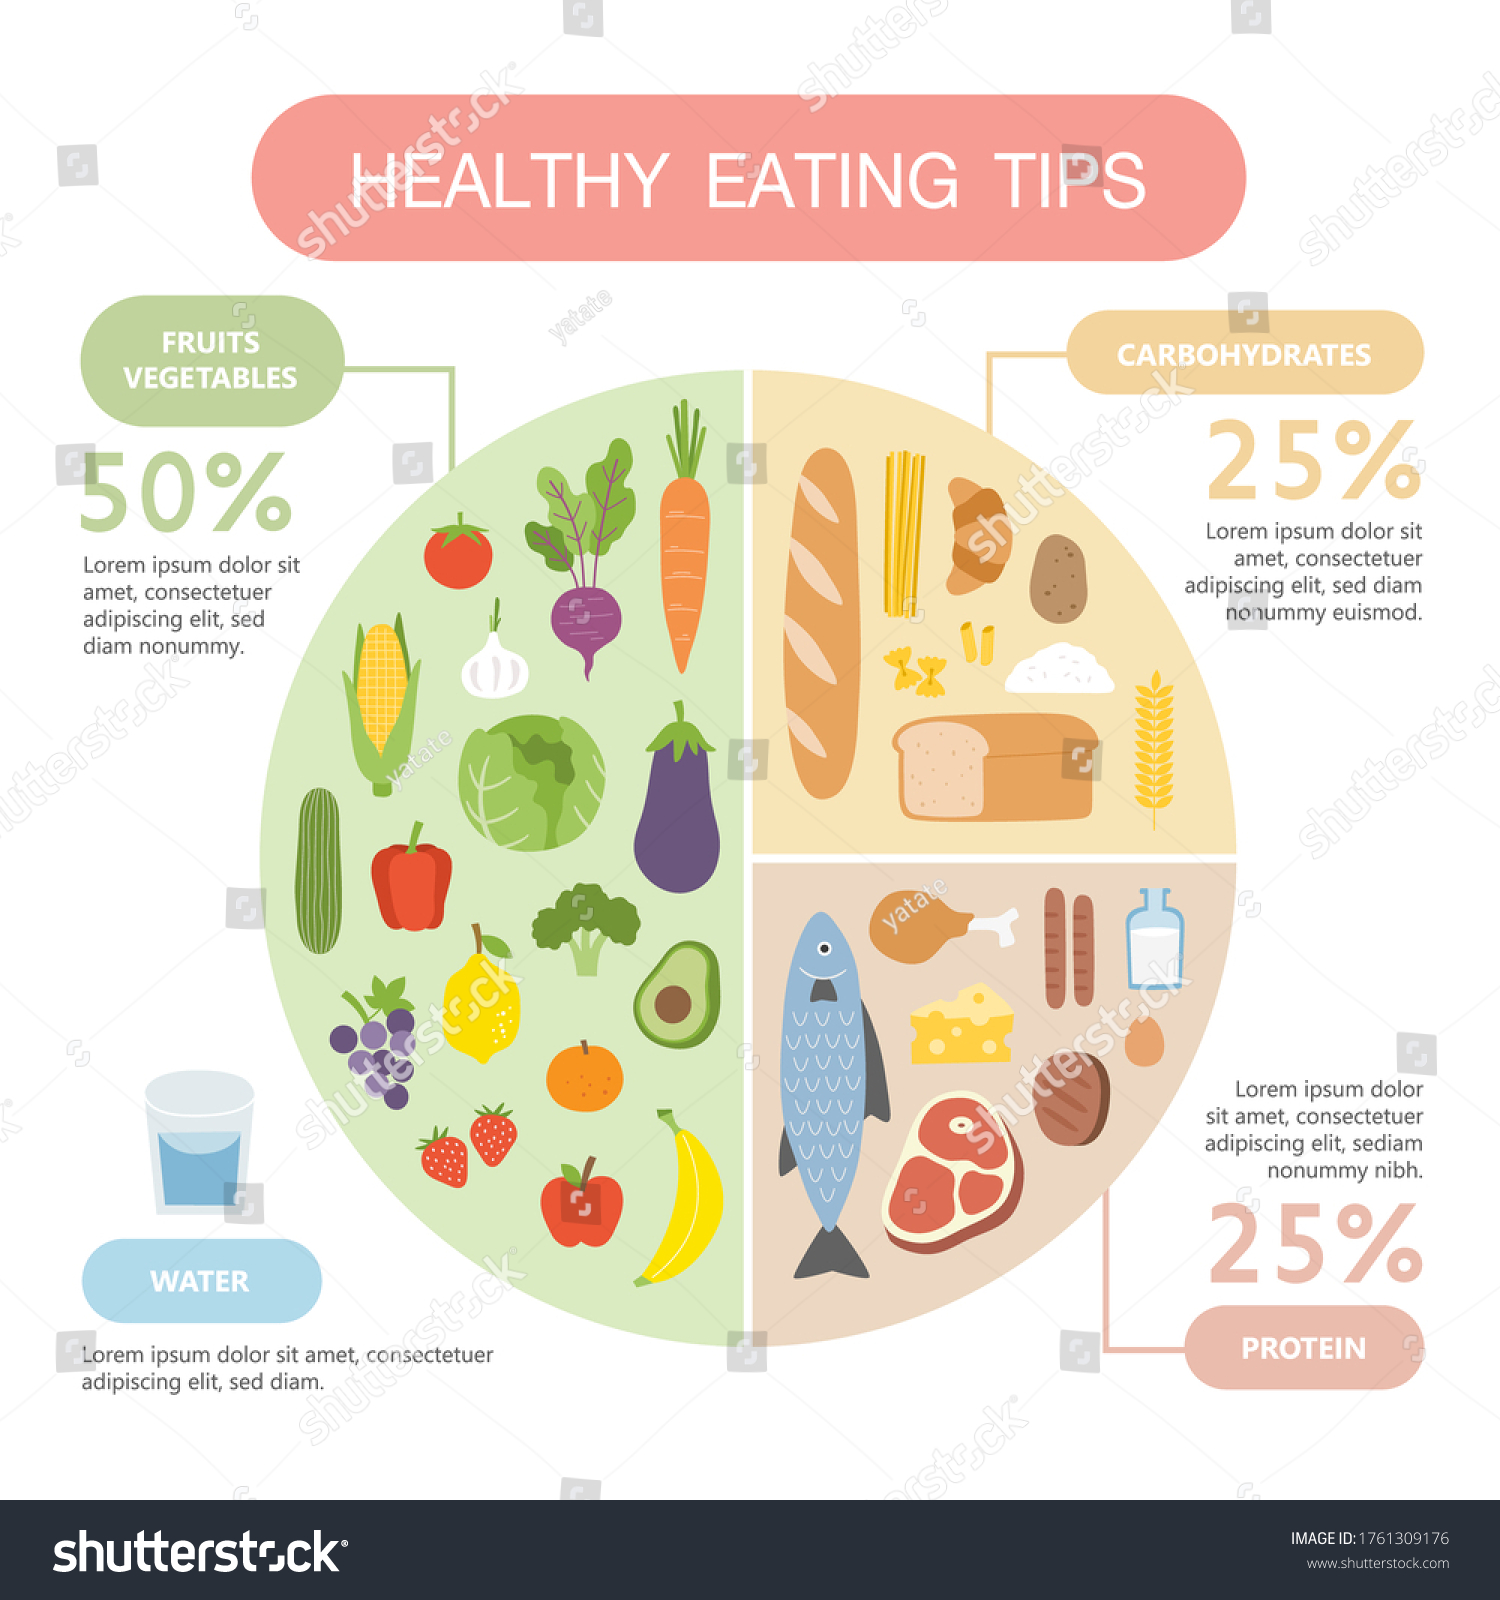 Healthy Eating Tips Infographic Chart Food Stock Vector Royalty Free 1761309176 Shutterstock 2019